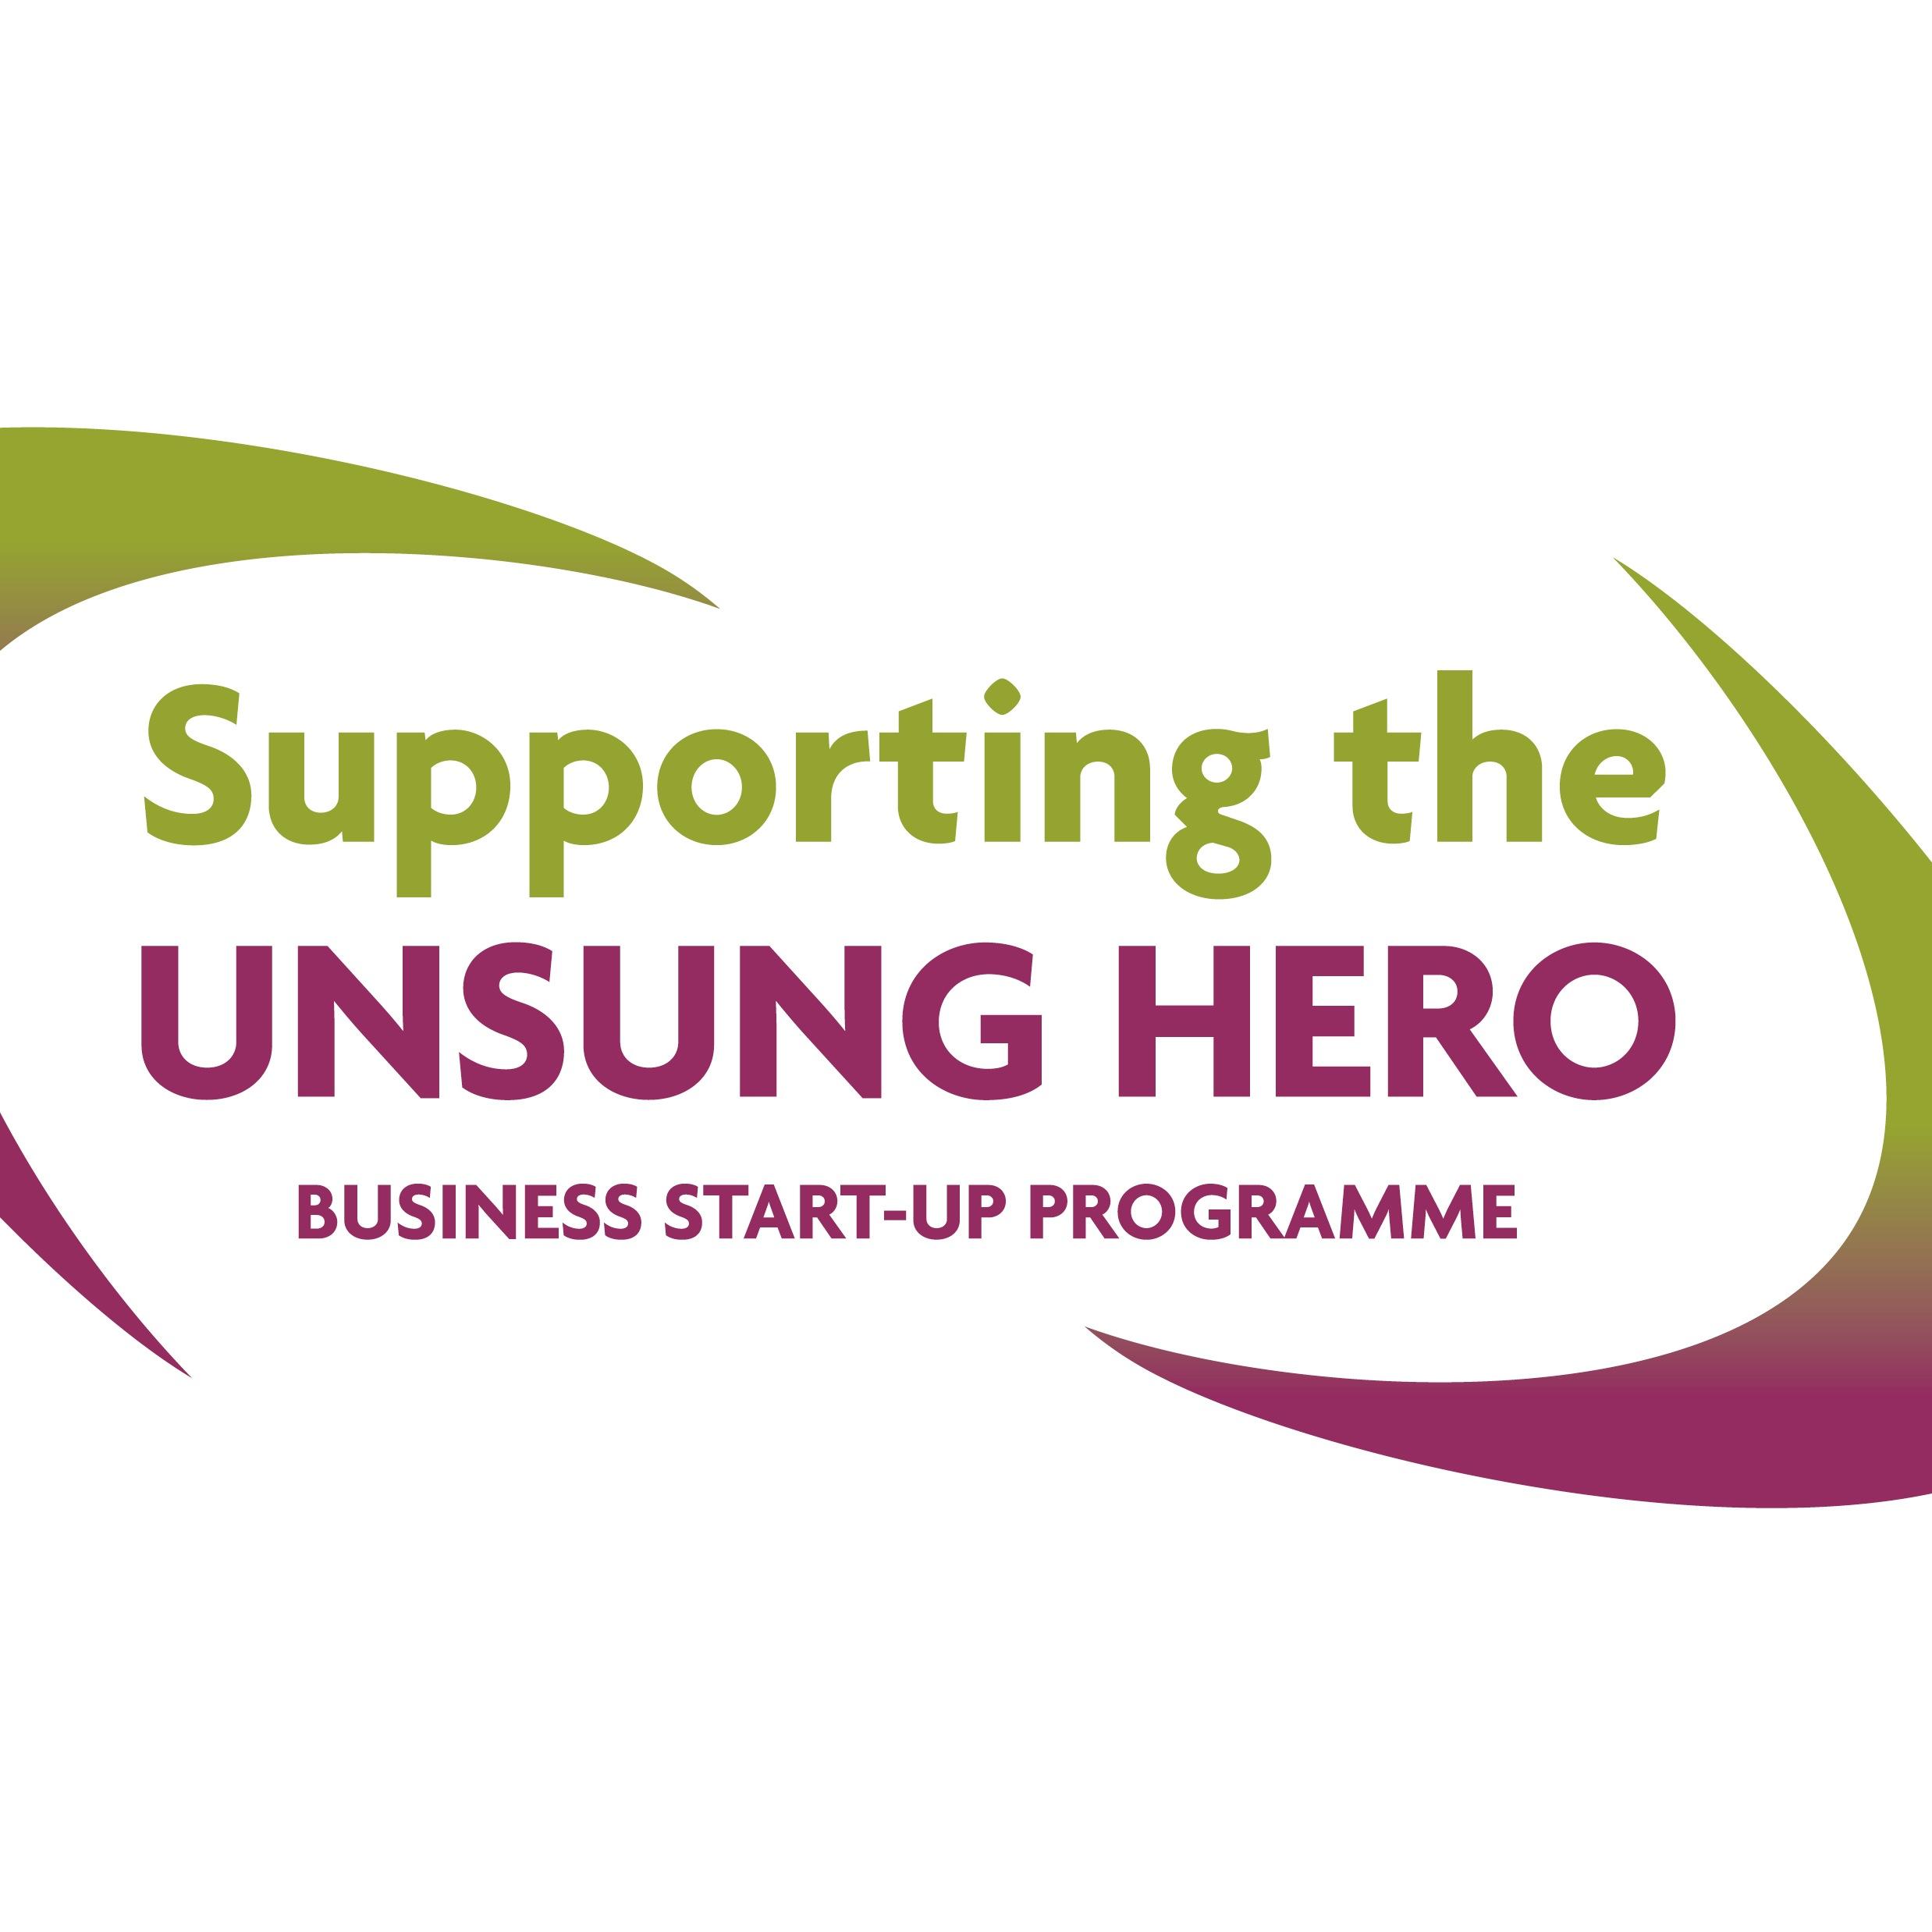 Free, Business Start-Up Programme developed specifically for Armed Forces Families delivered by the Black Country Chamber of Commerce, Chamber Military Network